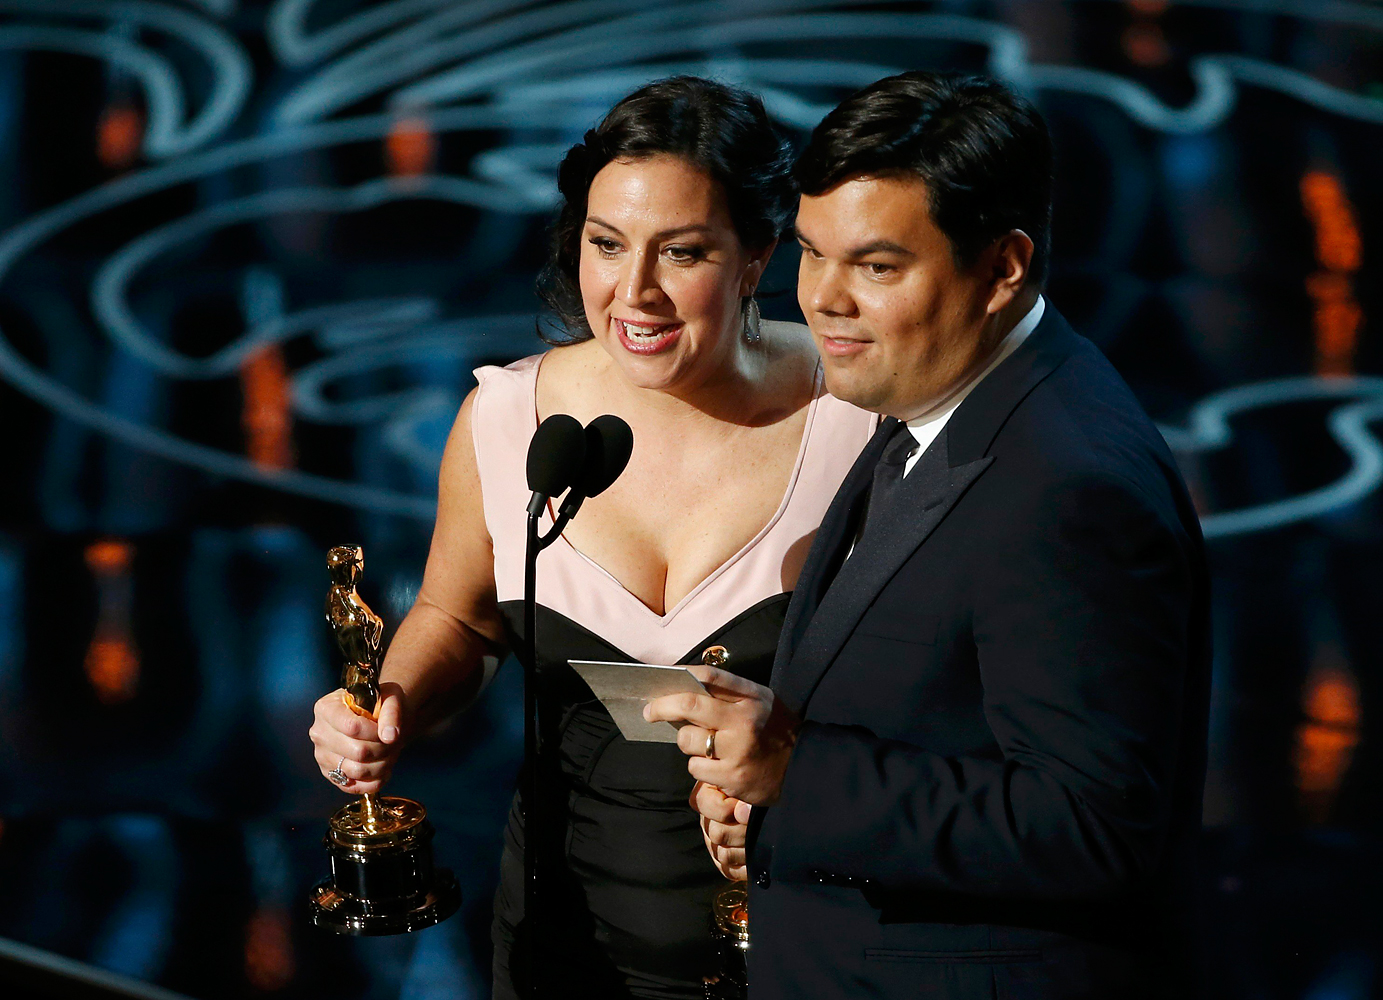 Kristen Anderson-Lopez and Lopez win for their song "Let It Go", best original song for the film "Frozen" at the 86th Academy Awards in Hollywood